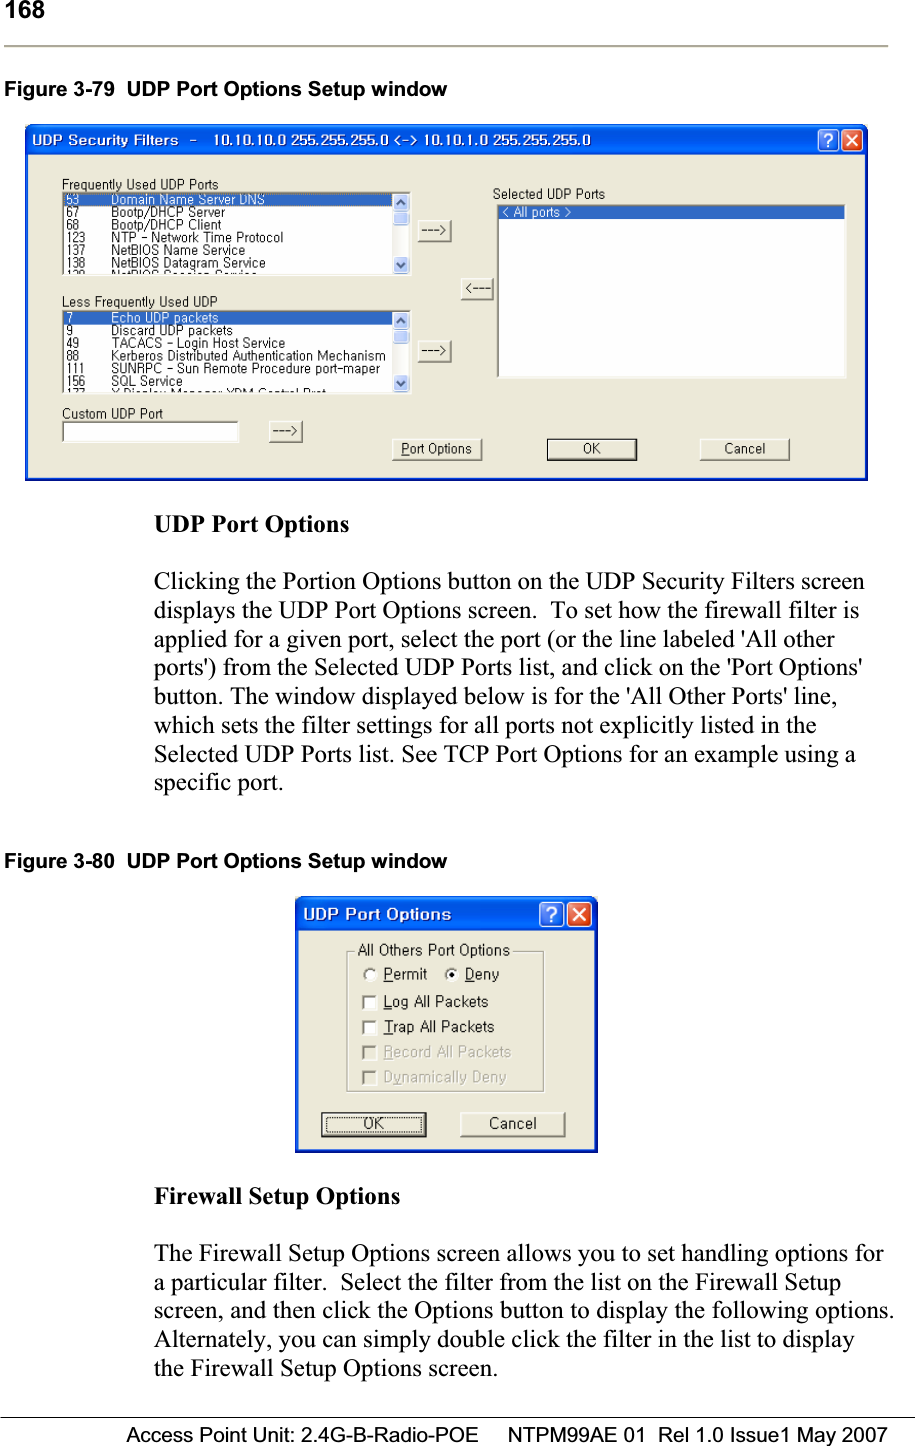 168 Access Point Unit: 2.4G-B-Radio-POE     NTPM99AE 01  Rel 1.0 Issue1 May 2007Figure 3-79  UDP Port Options Setup window UDP Port OptionsClicking the Portion Options button on the UDP Security Filters screen displays the UDP Port Options screen.  To set how the firewall filter is applied for a given port, select the port (or the line labeled &apos;All other ports&apos;) from the Selected UDP Ports list, and click on the &apos;Port Options&apos; button. The window displayed below is for the &apos;All Other Ports&apos; line, which sets the filter settings for all ports not explicitly listed in the Selected UDP Ports list. See TCP Port Options for an example using a specific port. Figure 3-80  UDP Port Options Setup window Firewall Setup Options  The Firewall Setup Options screen allows you to set handling options for a particular filter.  Select the filter from the list on the Firewall Setup screen, and then click the Options button to display the following options. Alternately, you can simply double click the filter in the list to display the Firewall Setup Options screen. 